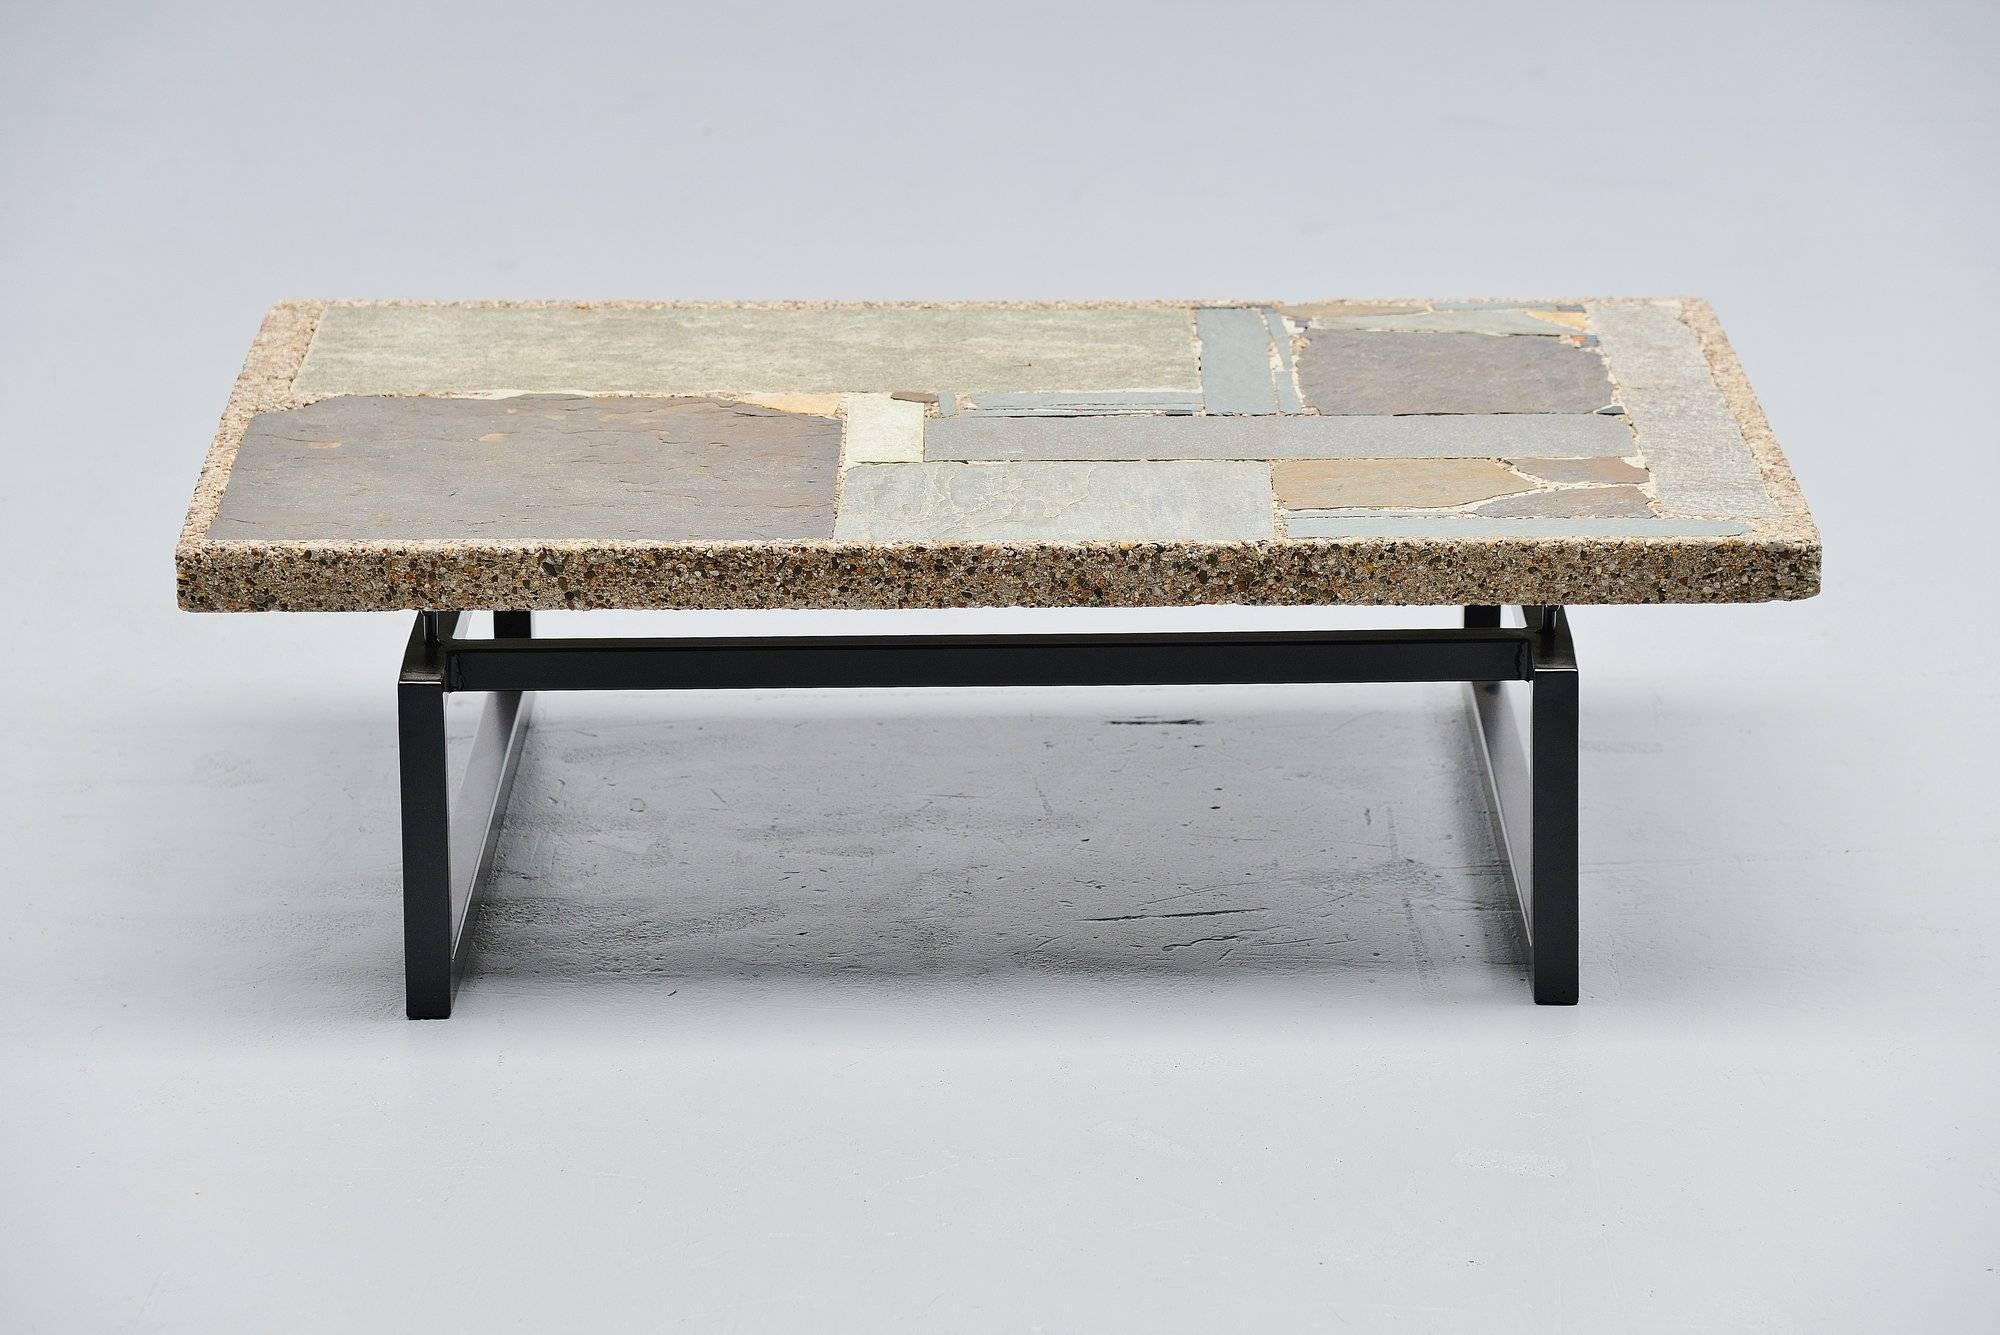 Very nice sober and early example of a Paul Kingma coffee table. Paul Kingma was well known for his architectural tables that pay a tribute to the riches of Nature by travelling extensively in search of rare materials, whether raw or industrially